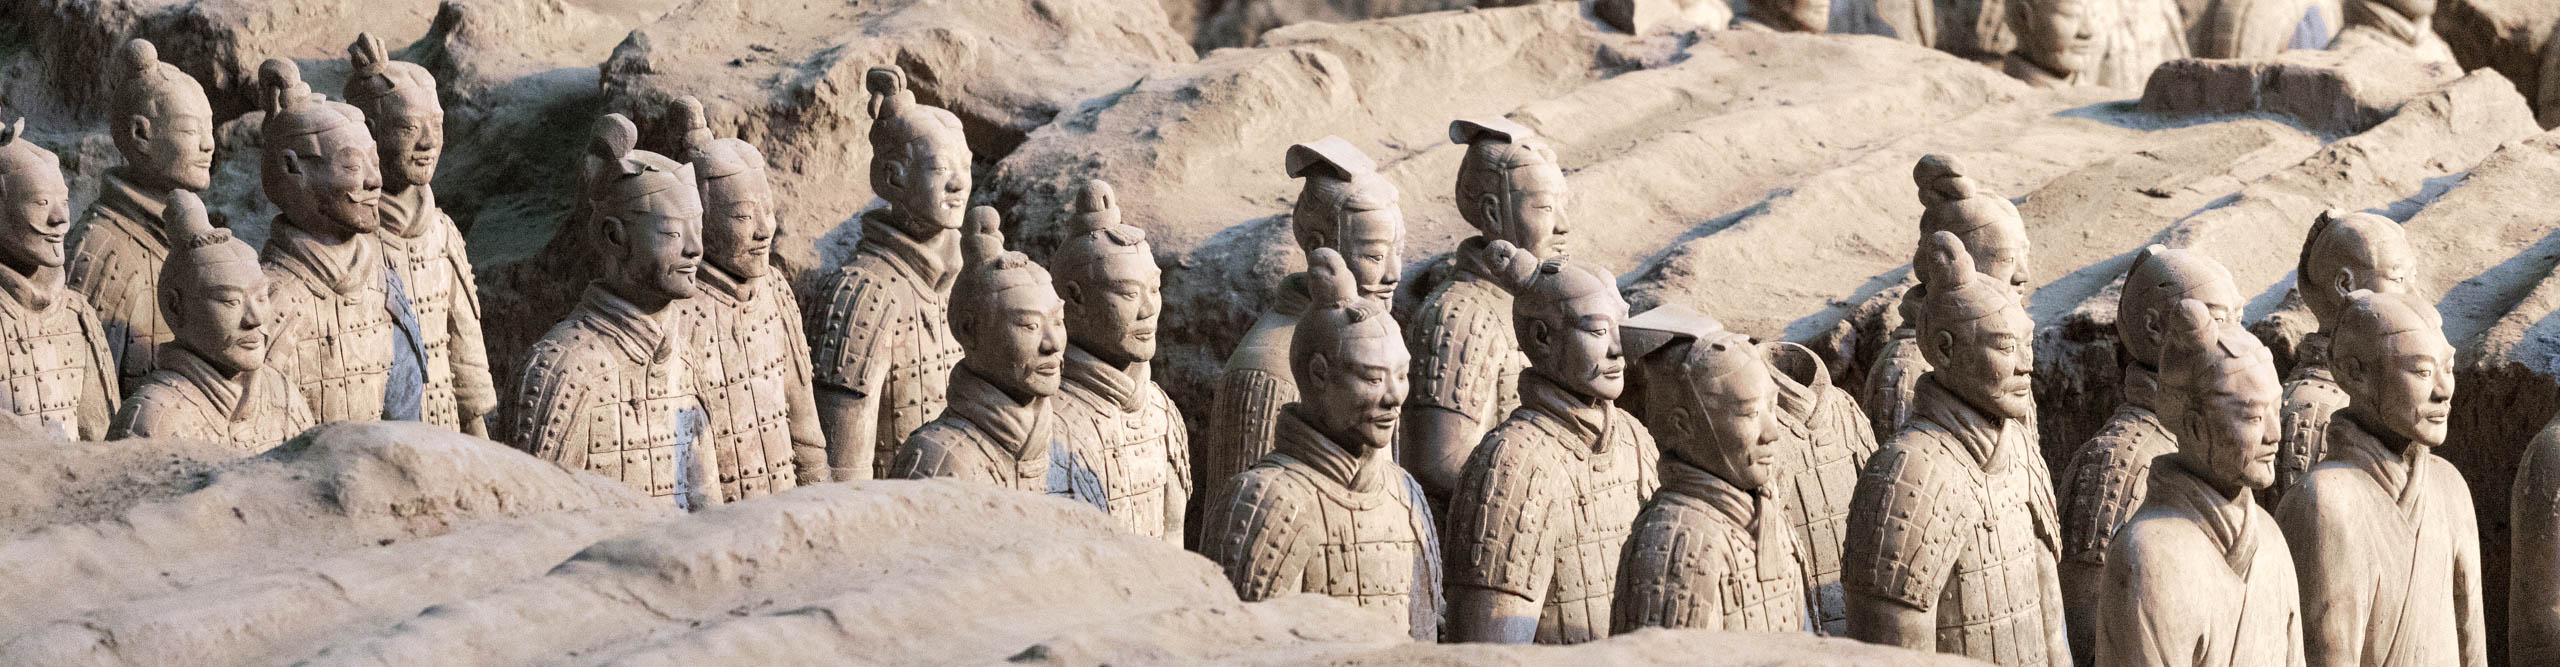 Terracotta warriors stand in the position where they were unearthered near the city of Xian, China